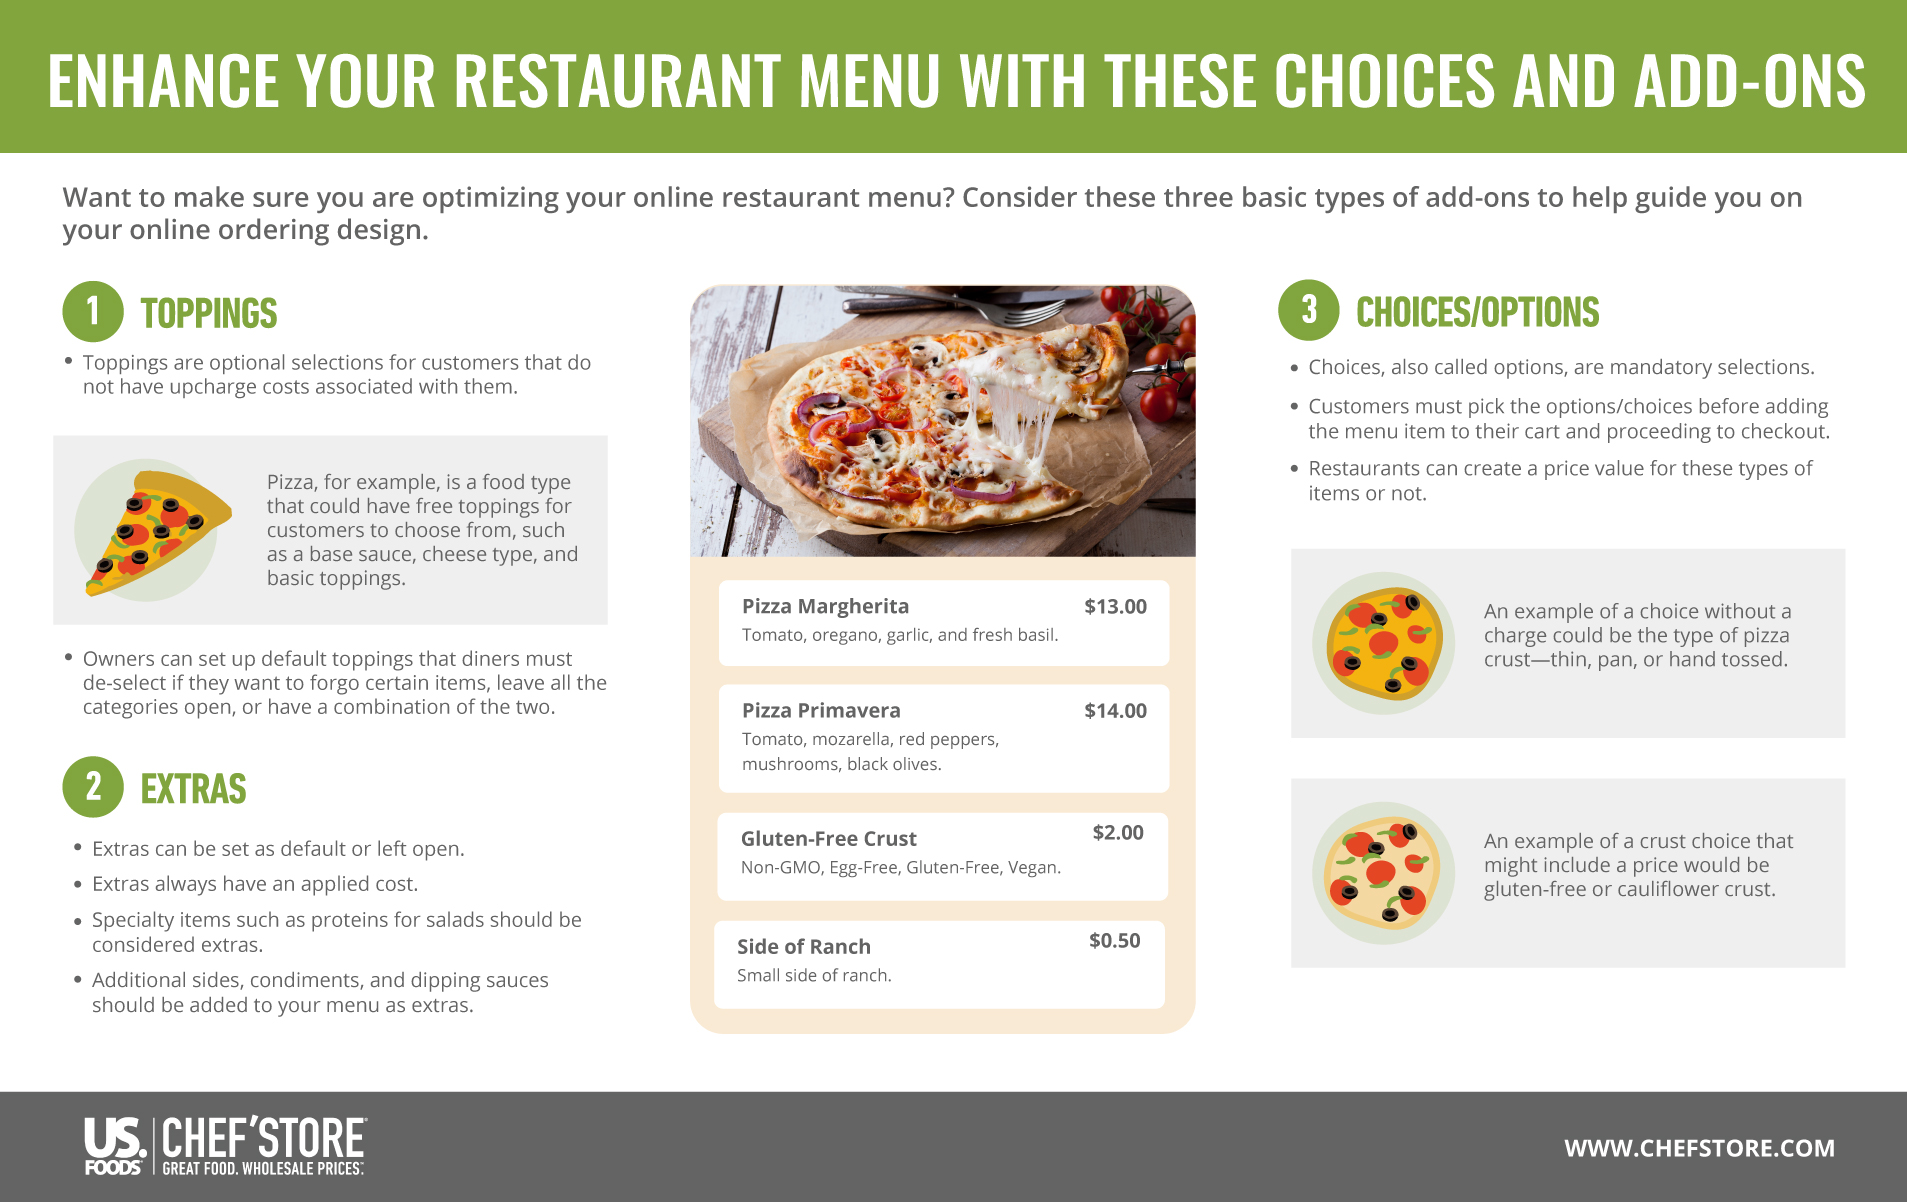 Enhance your menu with add-ons.